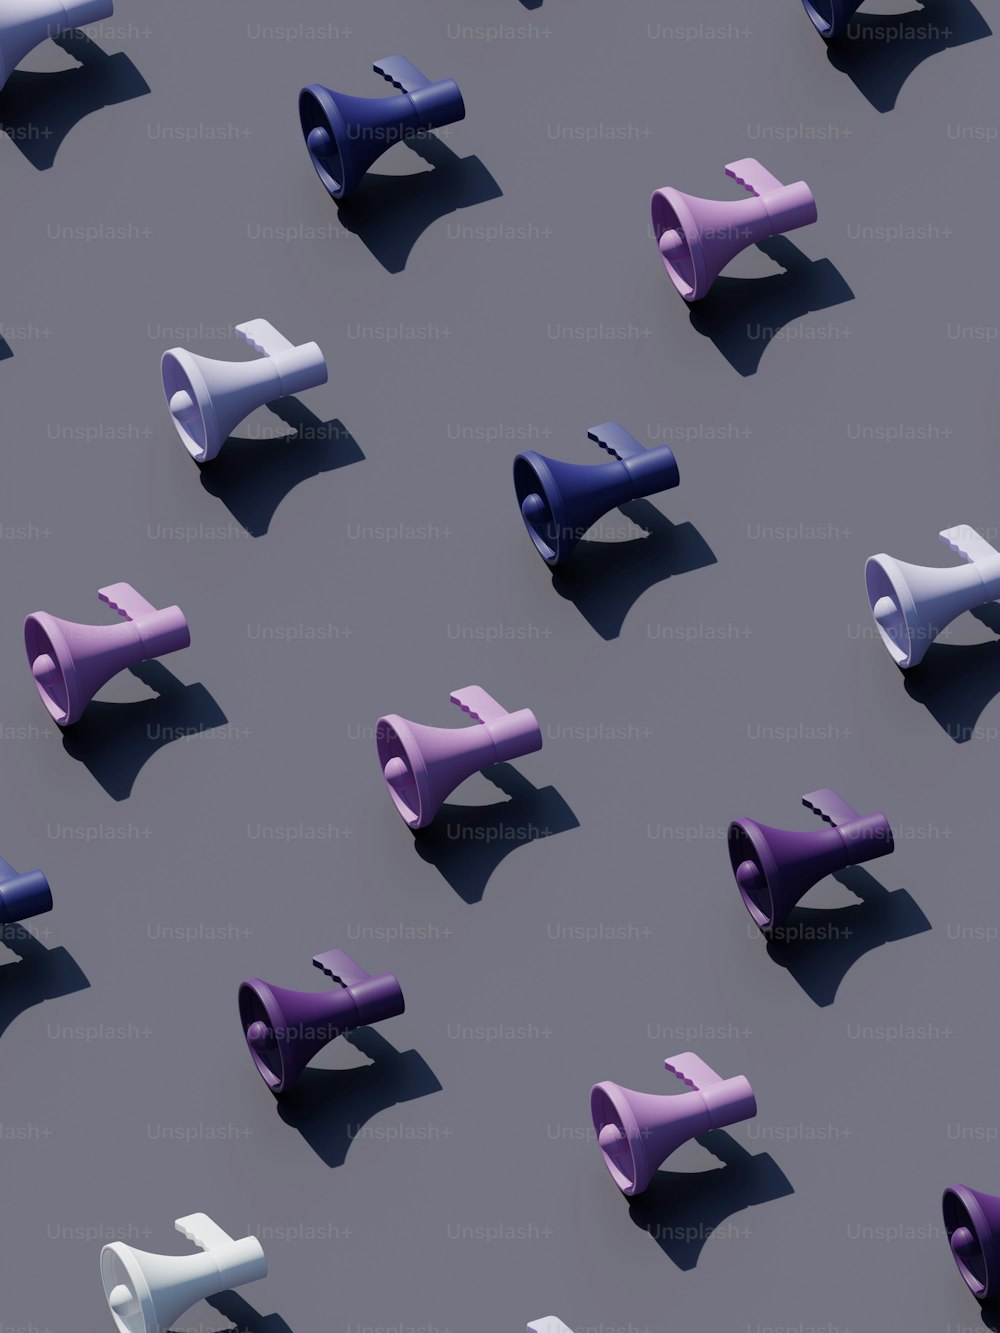 a group of purple and white objects on a gray surface